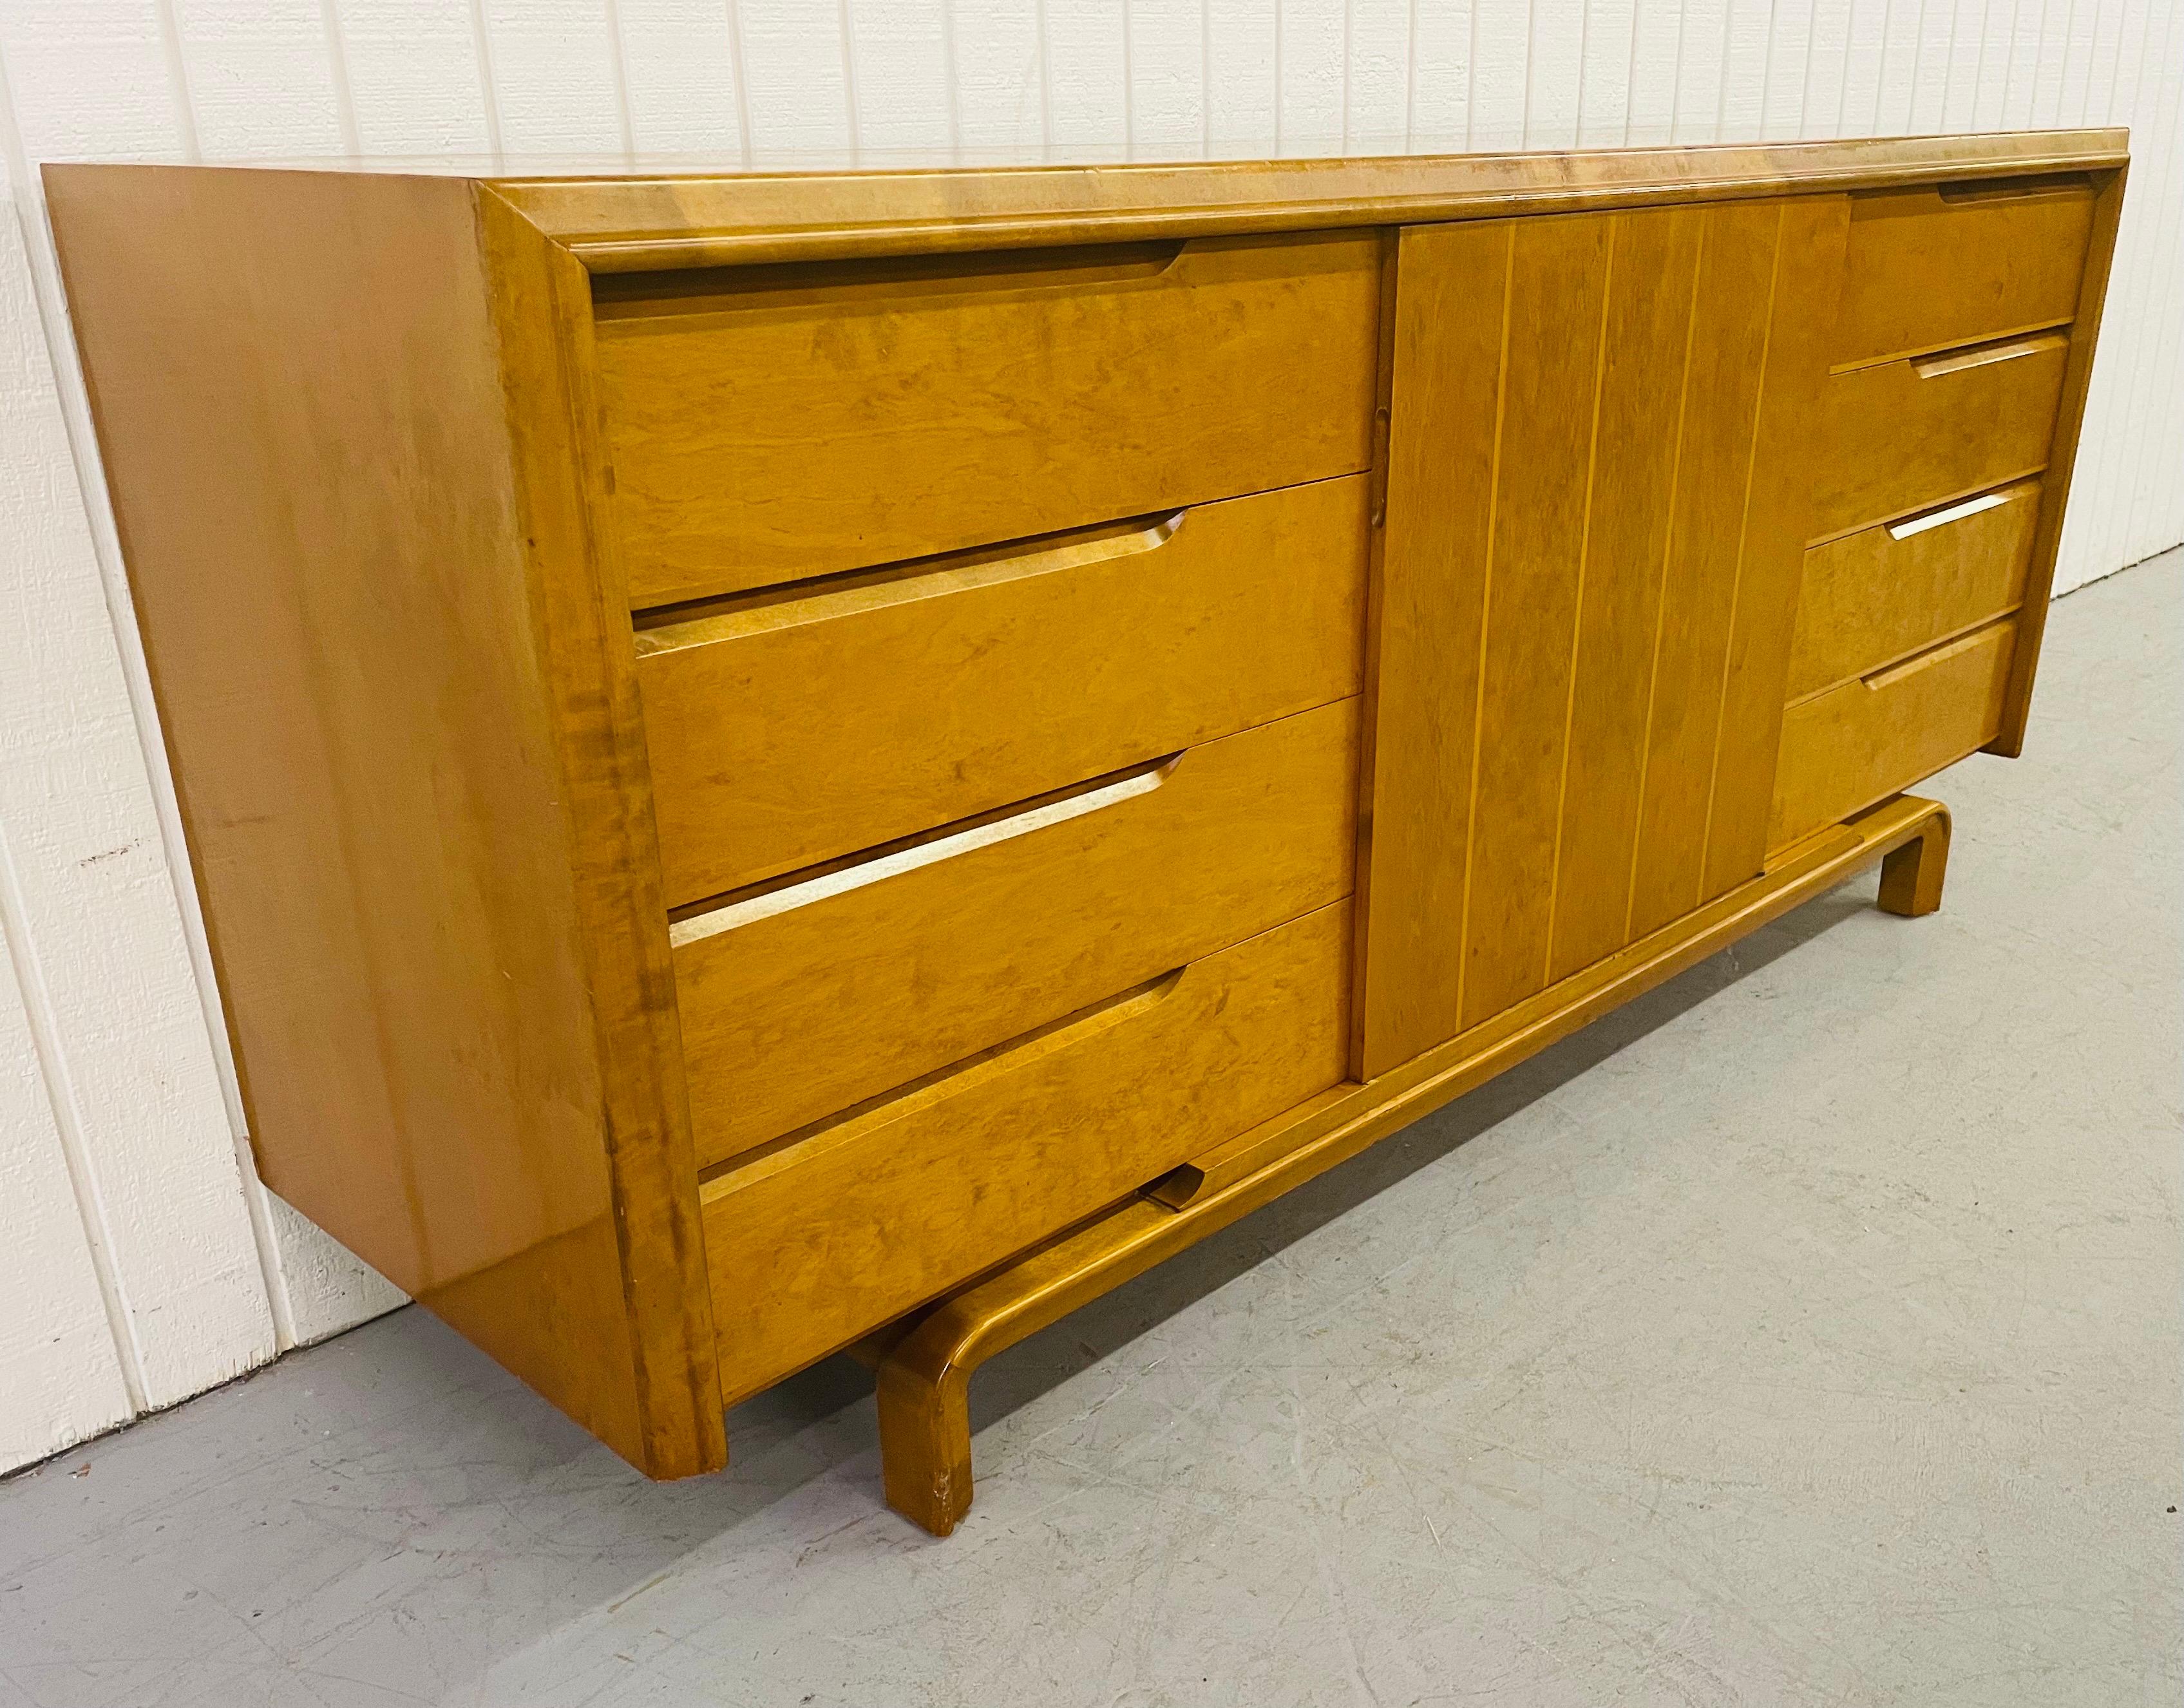 This listing is for a mid-century Edmond Spence dresser. Featuring a center door that opens up to storage space, eight drawers, and a beautiful champagne blonde finish.